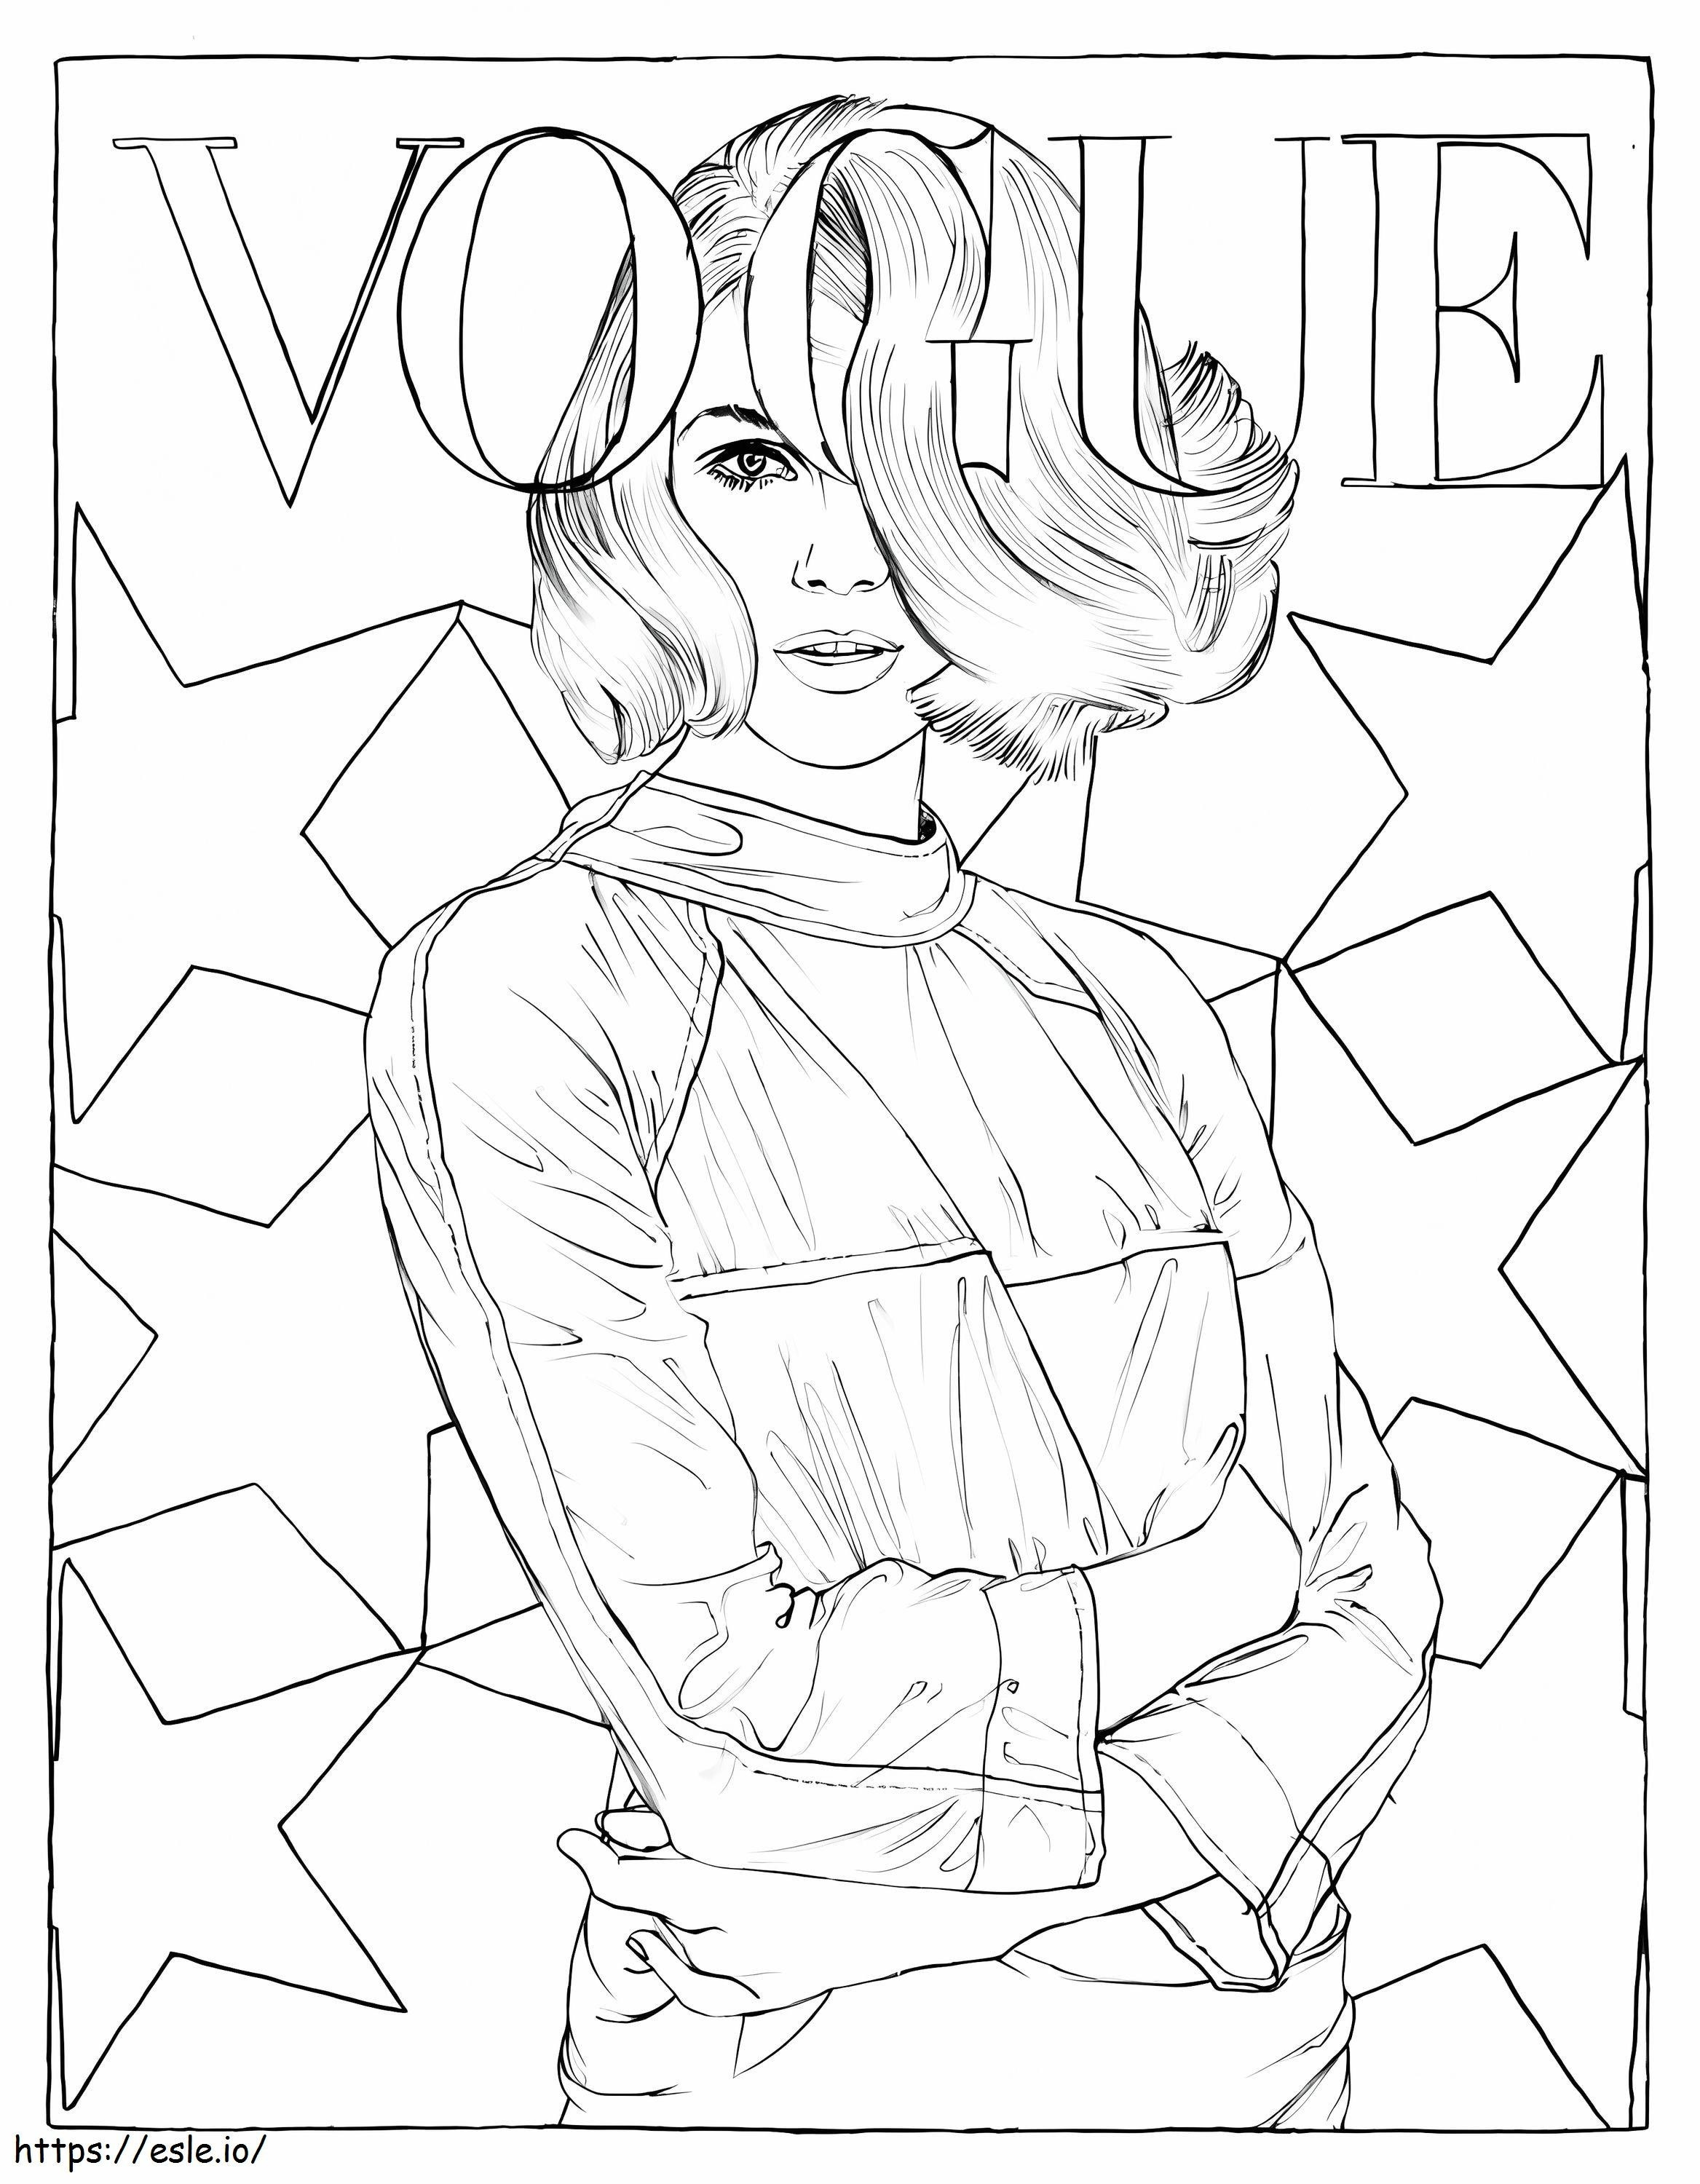 Magazine Cover Girl 1 coloring page